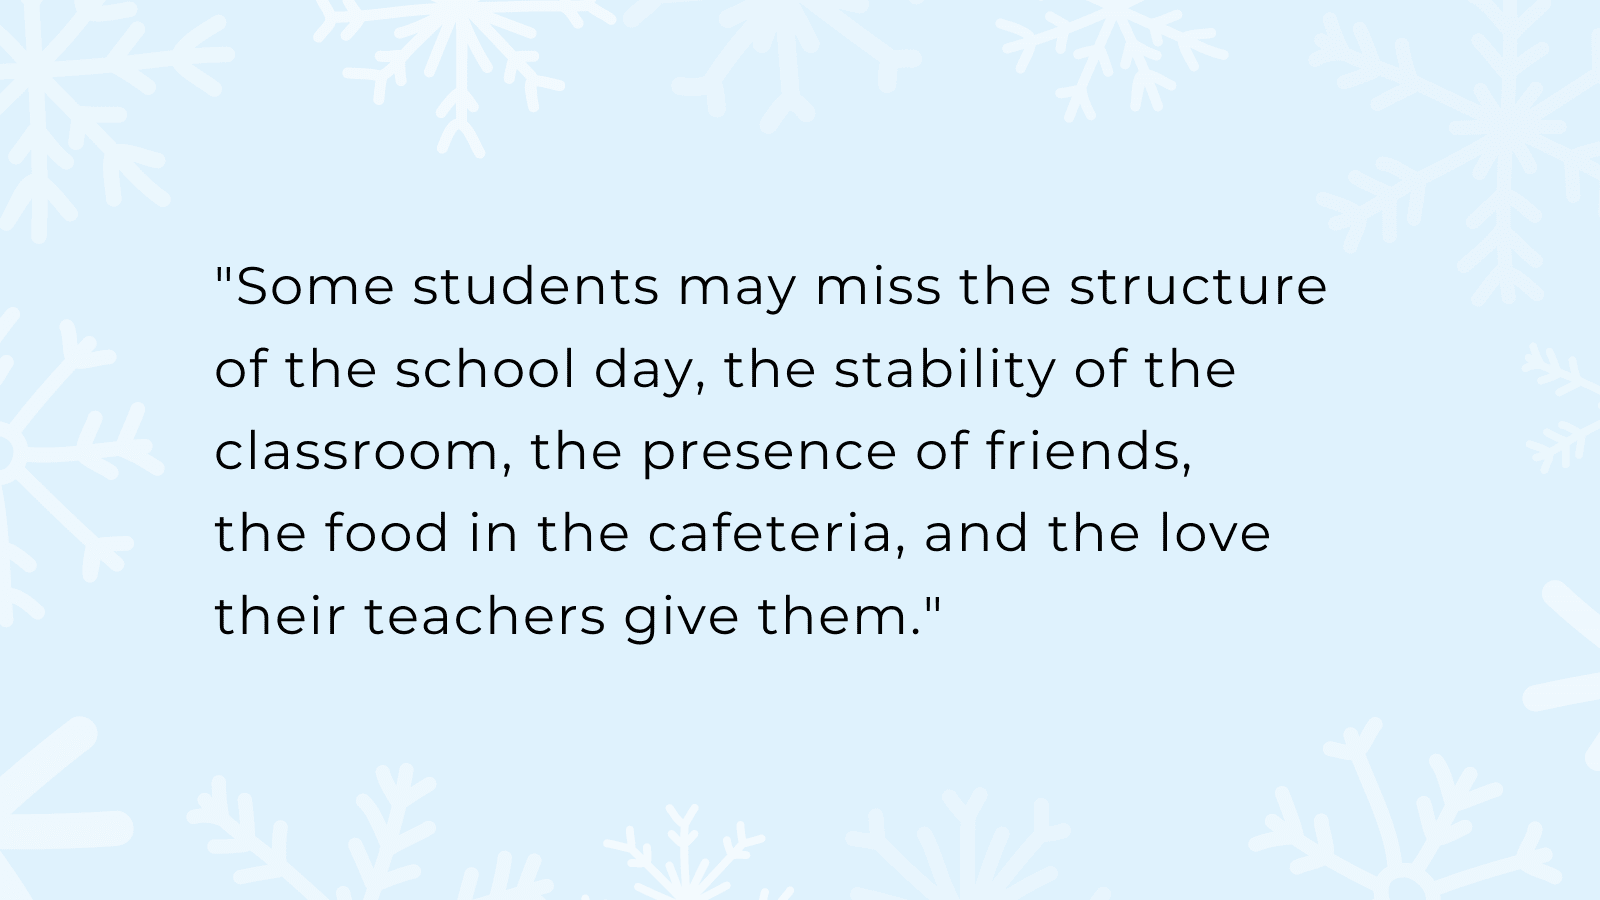 "Some students may miss the structure of the school day, the stability of the classroom, the presence of friends, the food in the cafeteria, and the love their teachers give them."